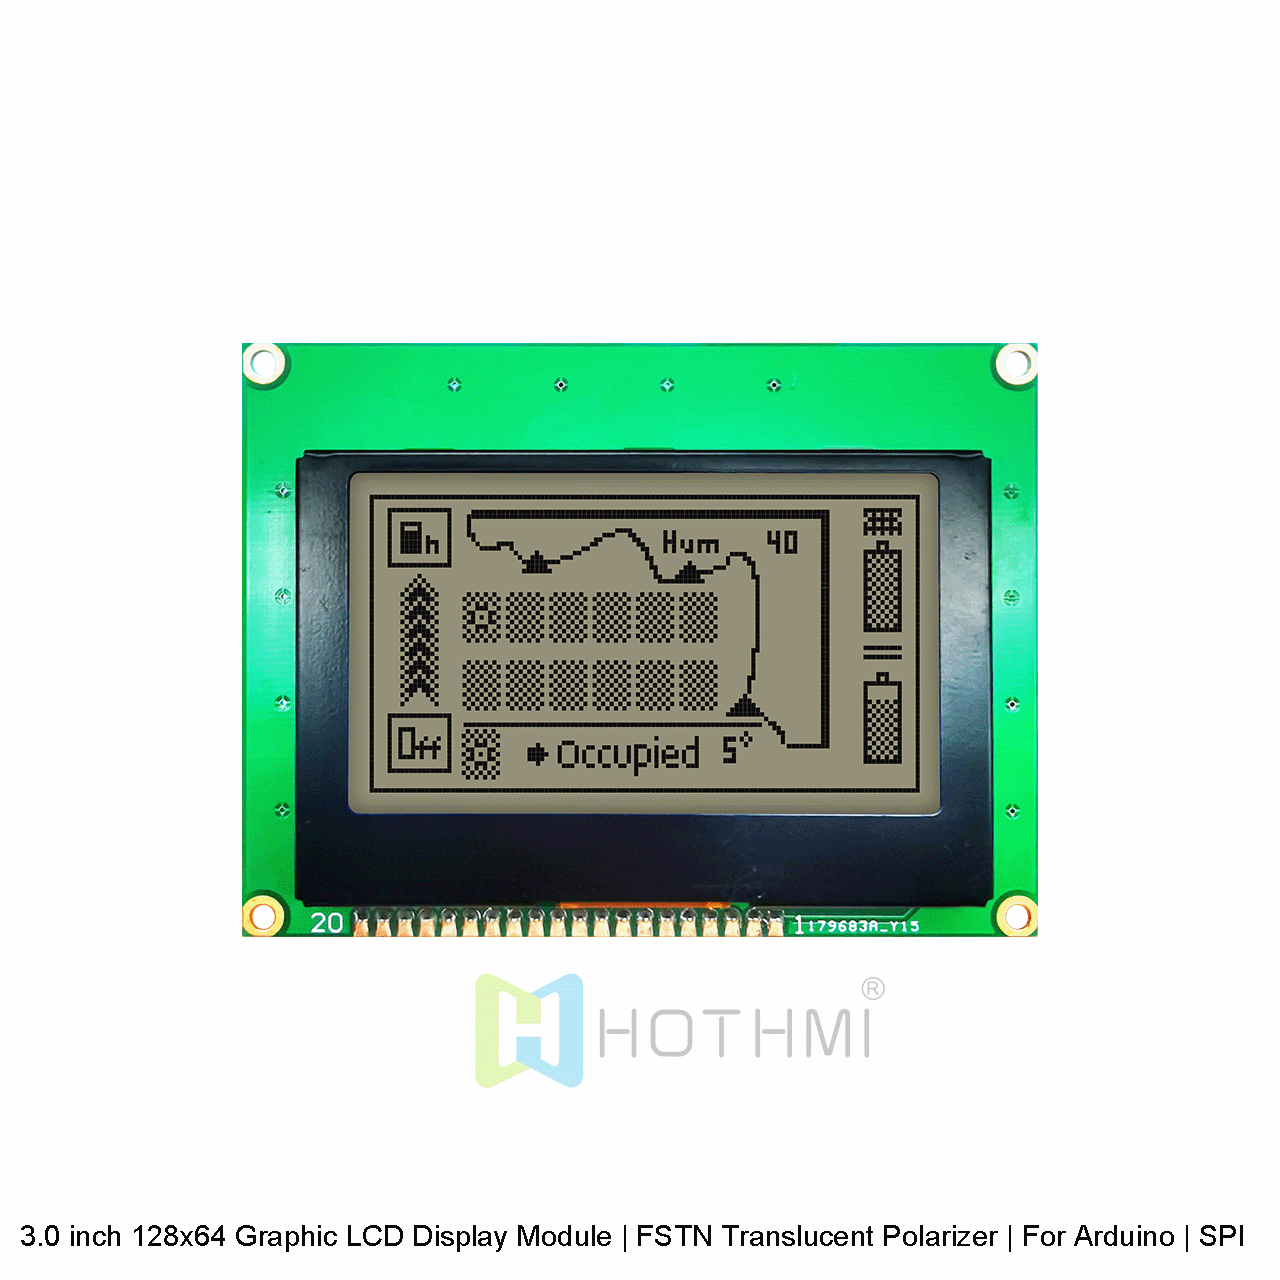 3.0 inch 128x64 Graphic LCD Display Module | FSTN Translucent Polarizer | For Arduino | SPI Interface | Gray Text on White Background